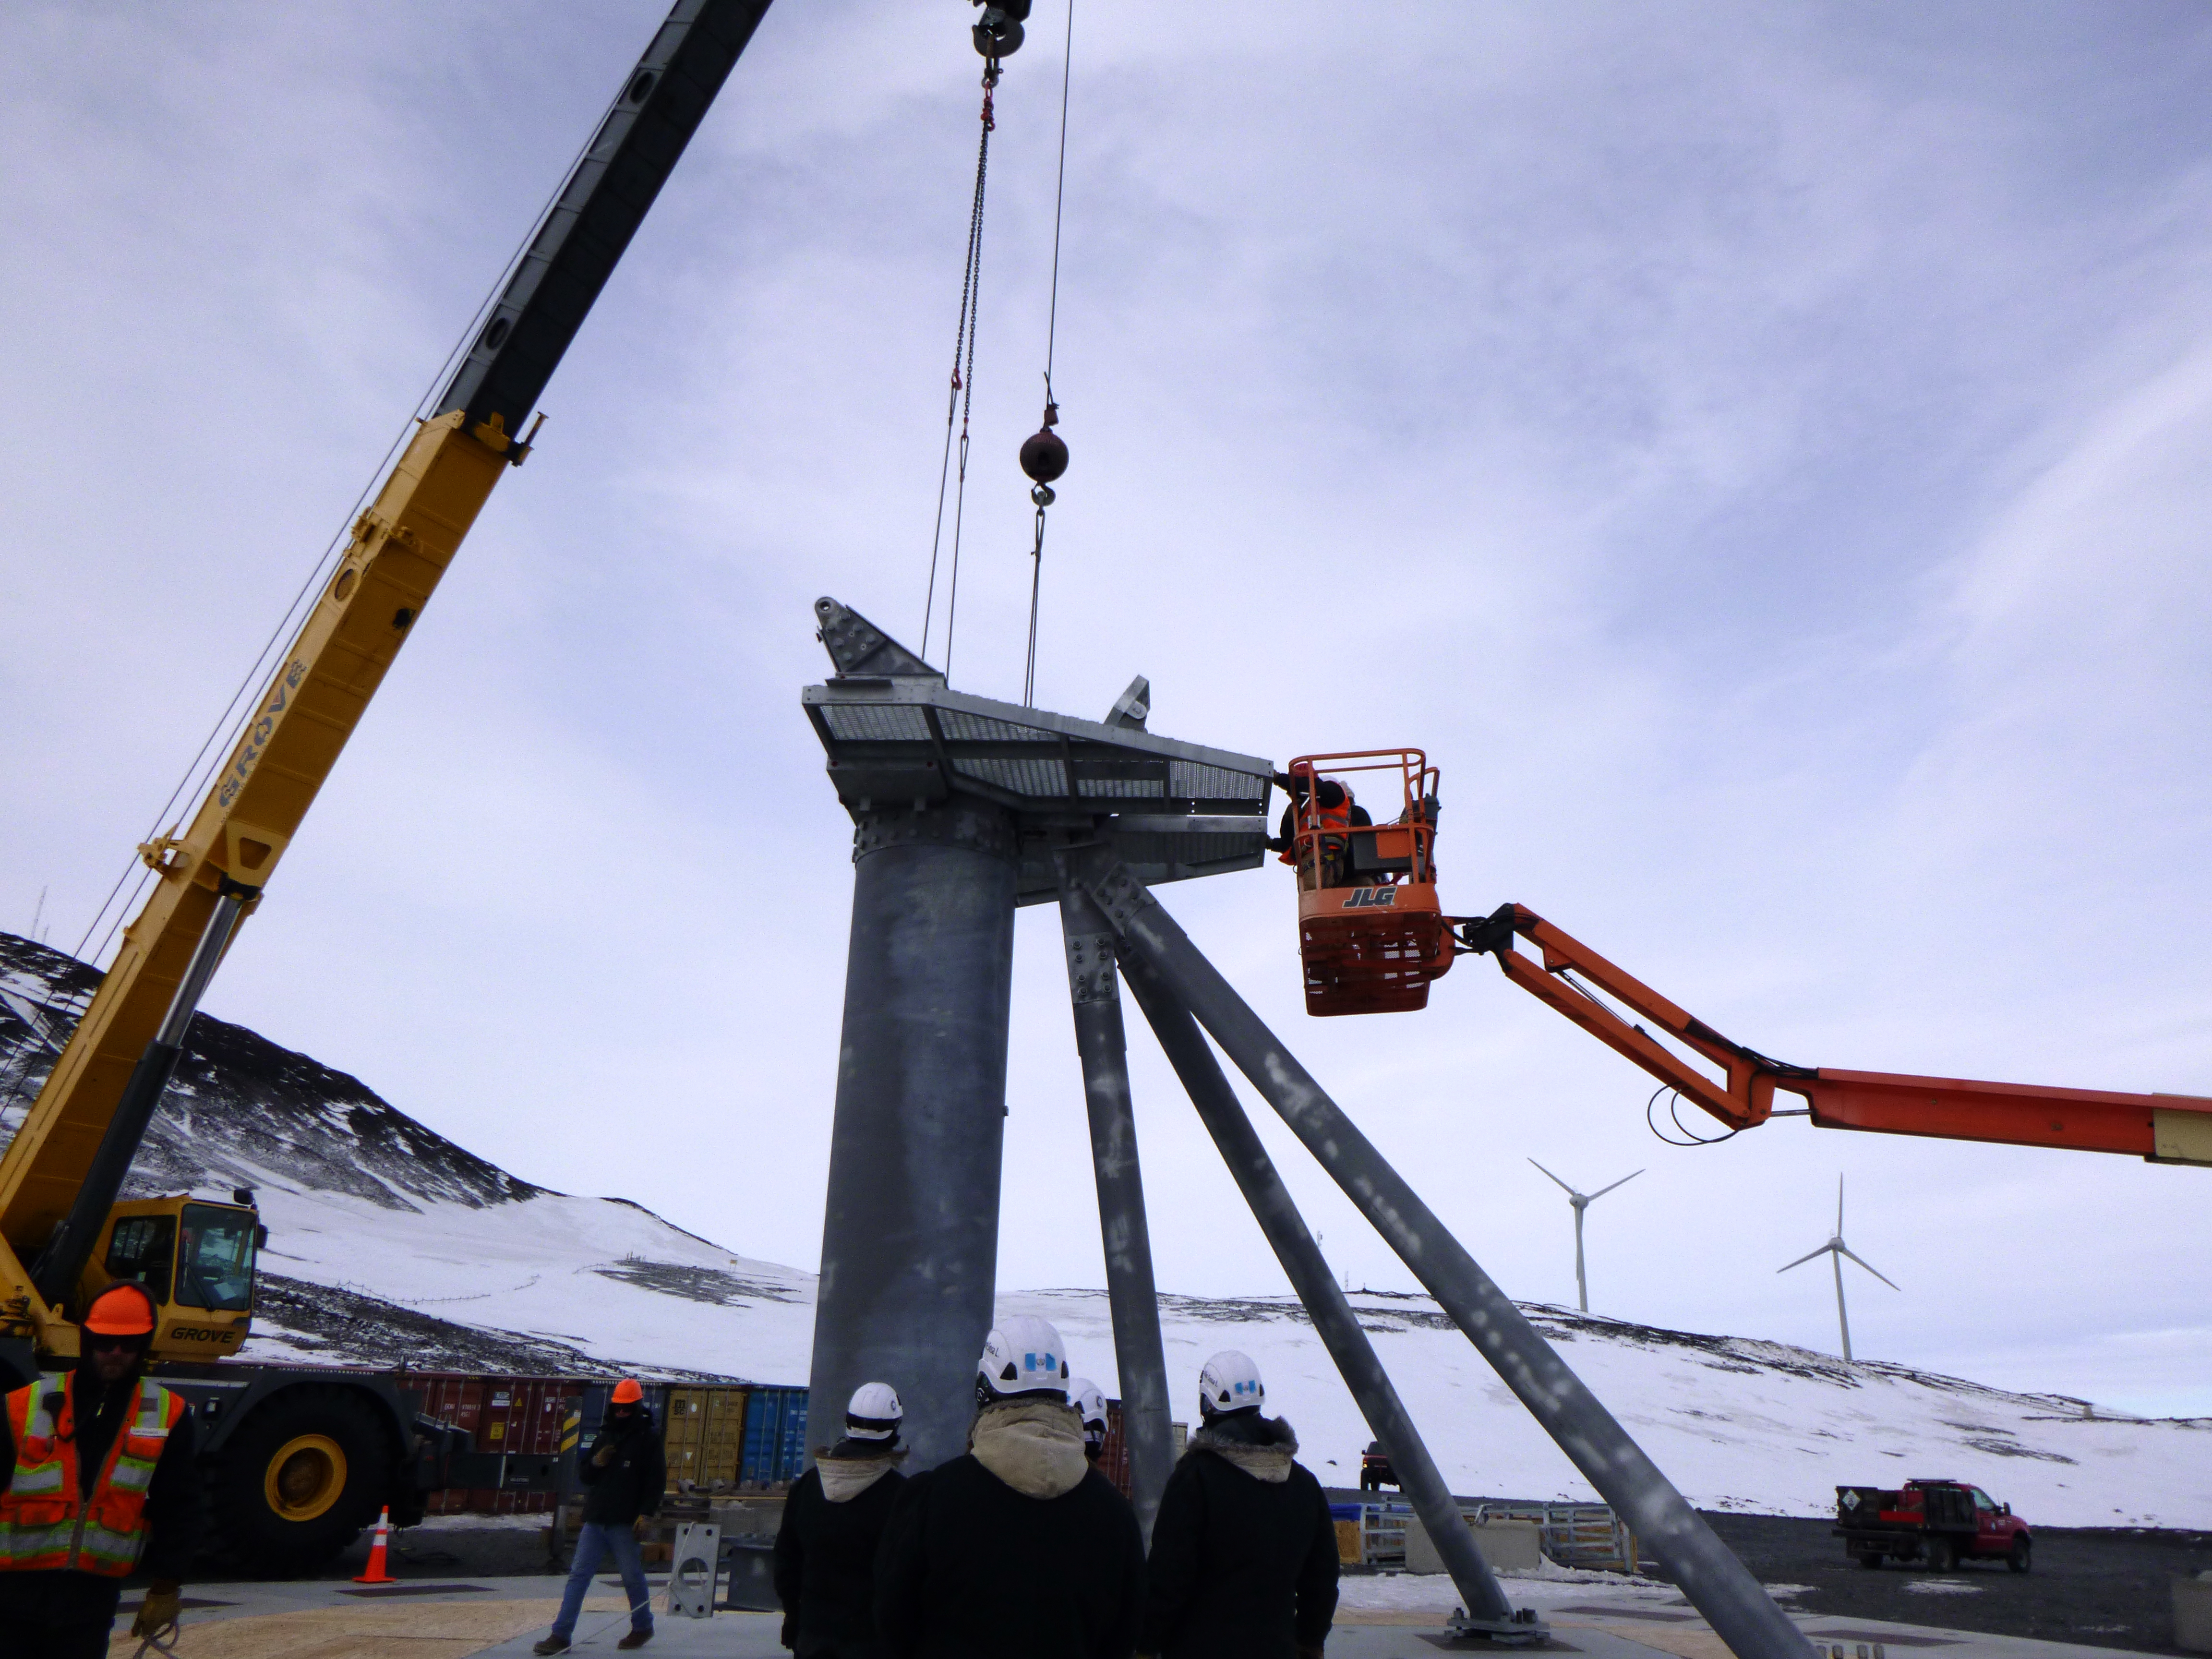 Workers construct a large pedestal.